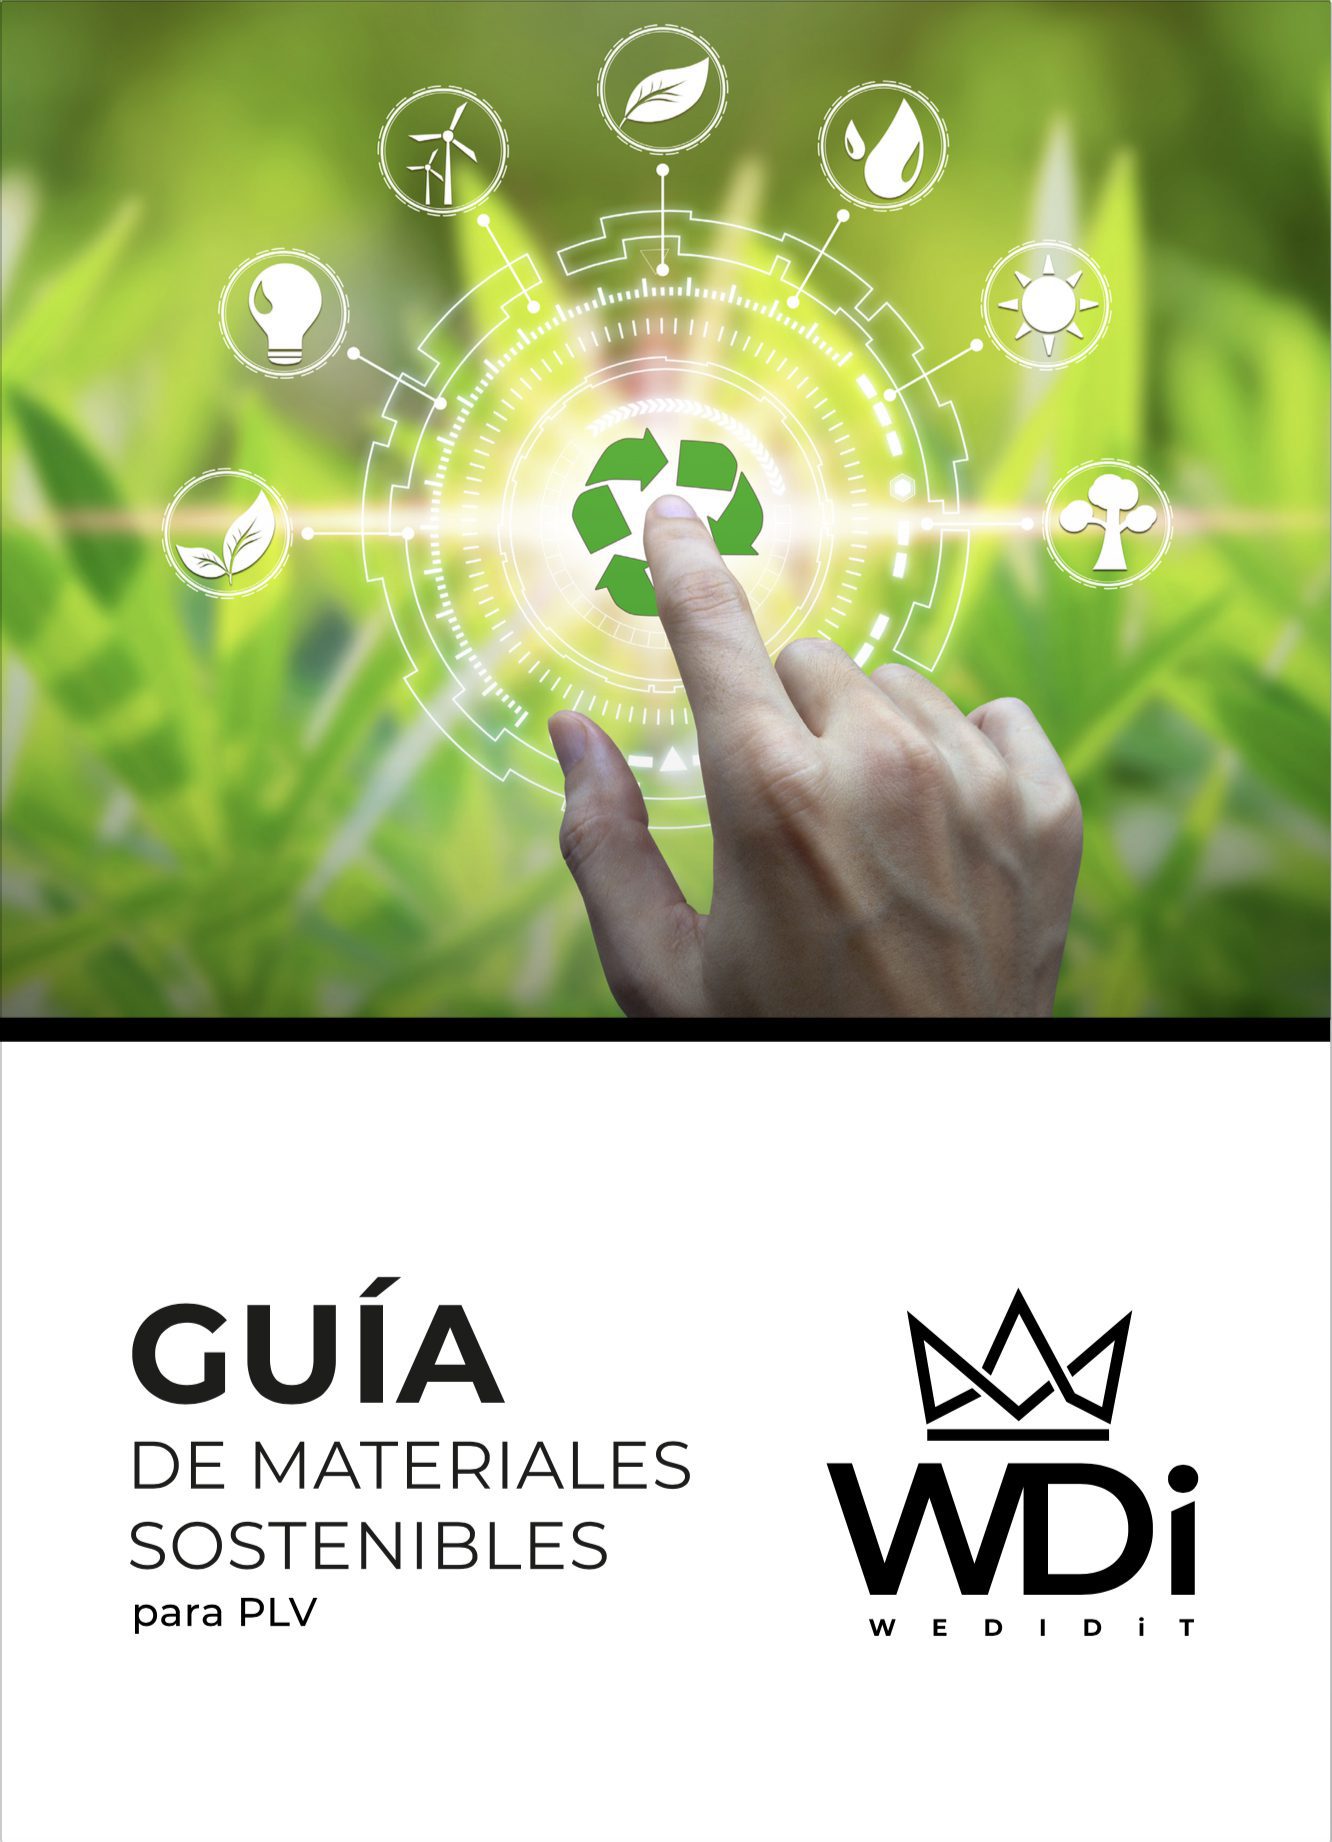 Sustainable materials guide. WDI